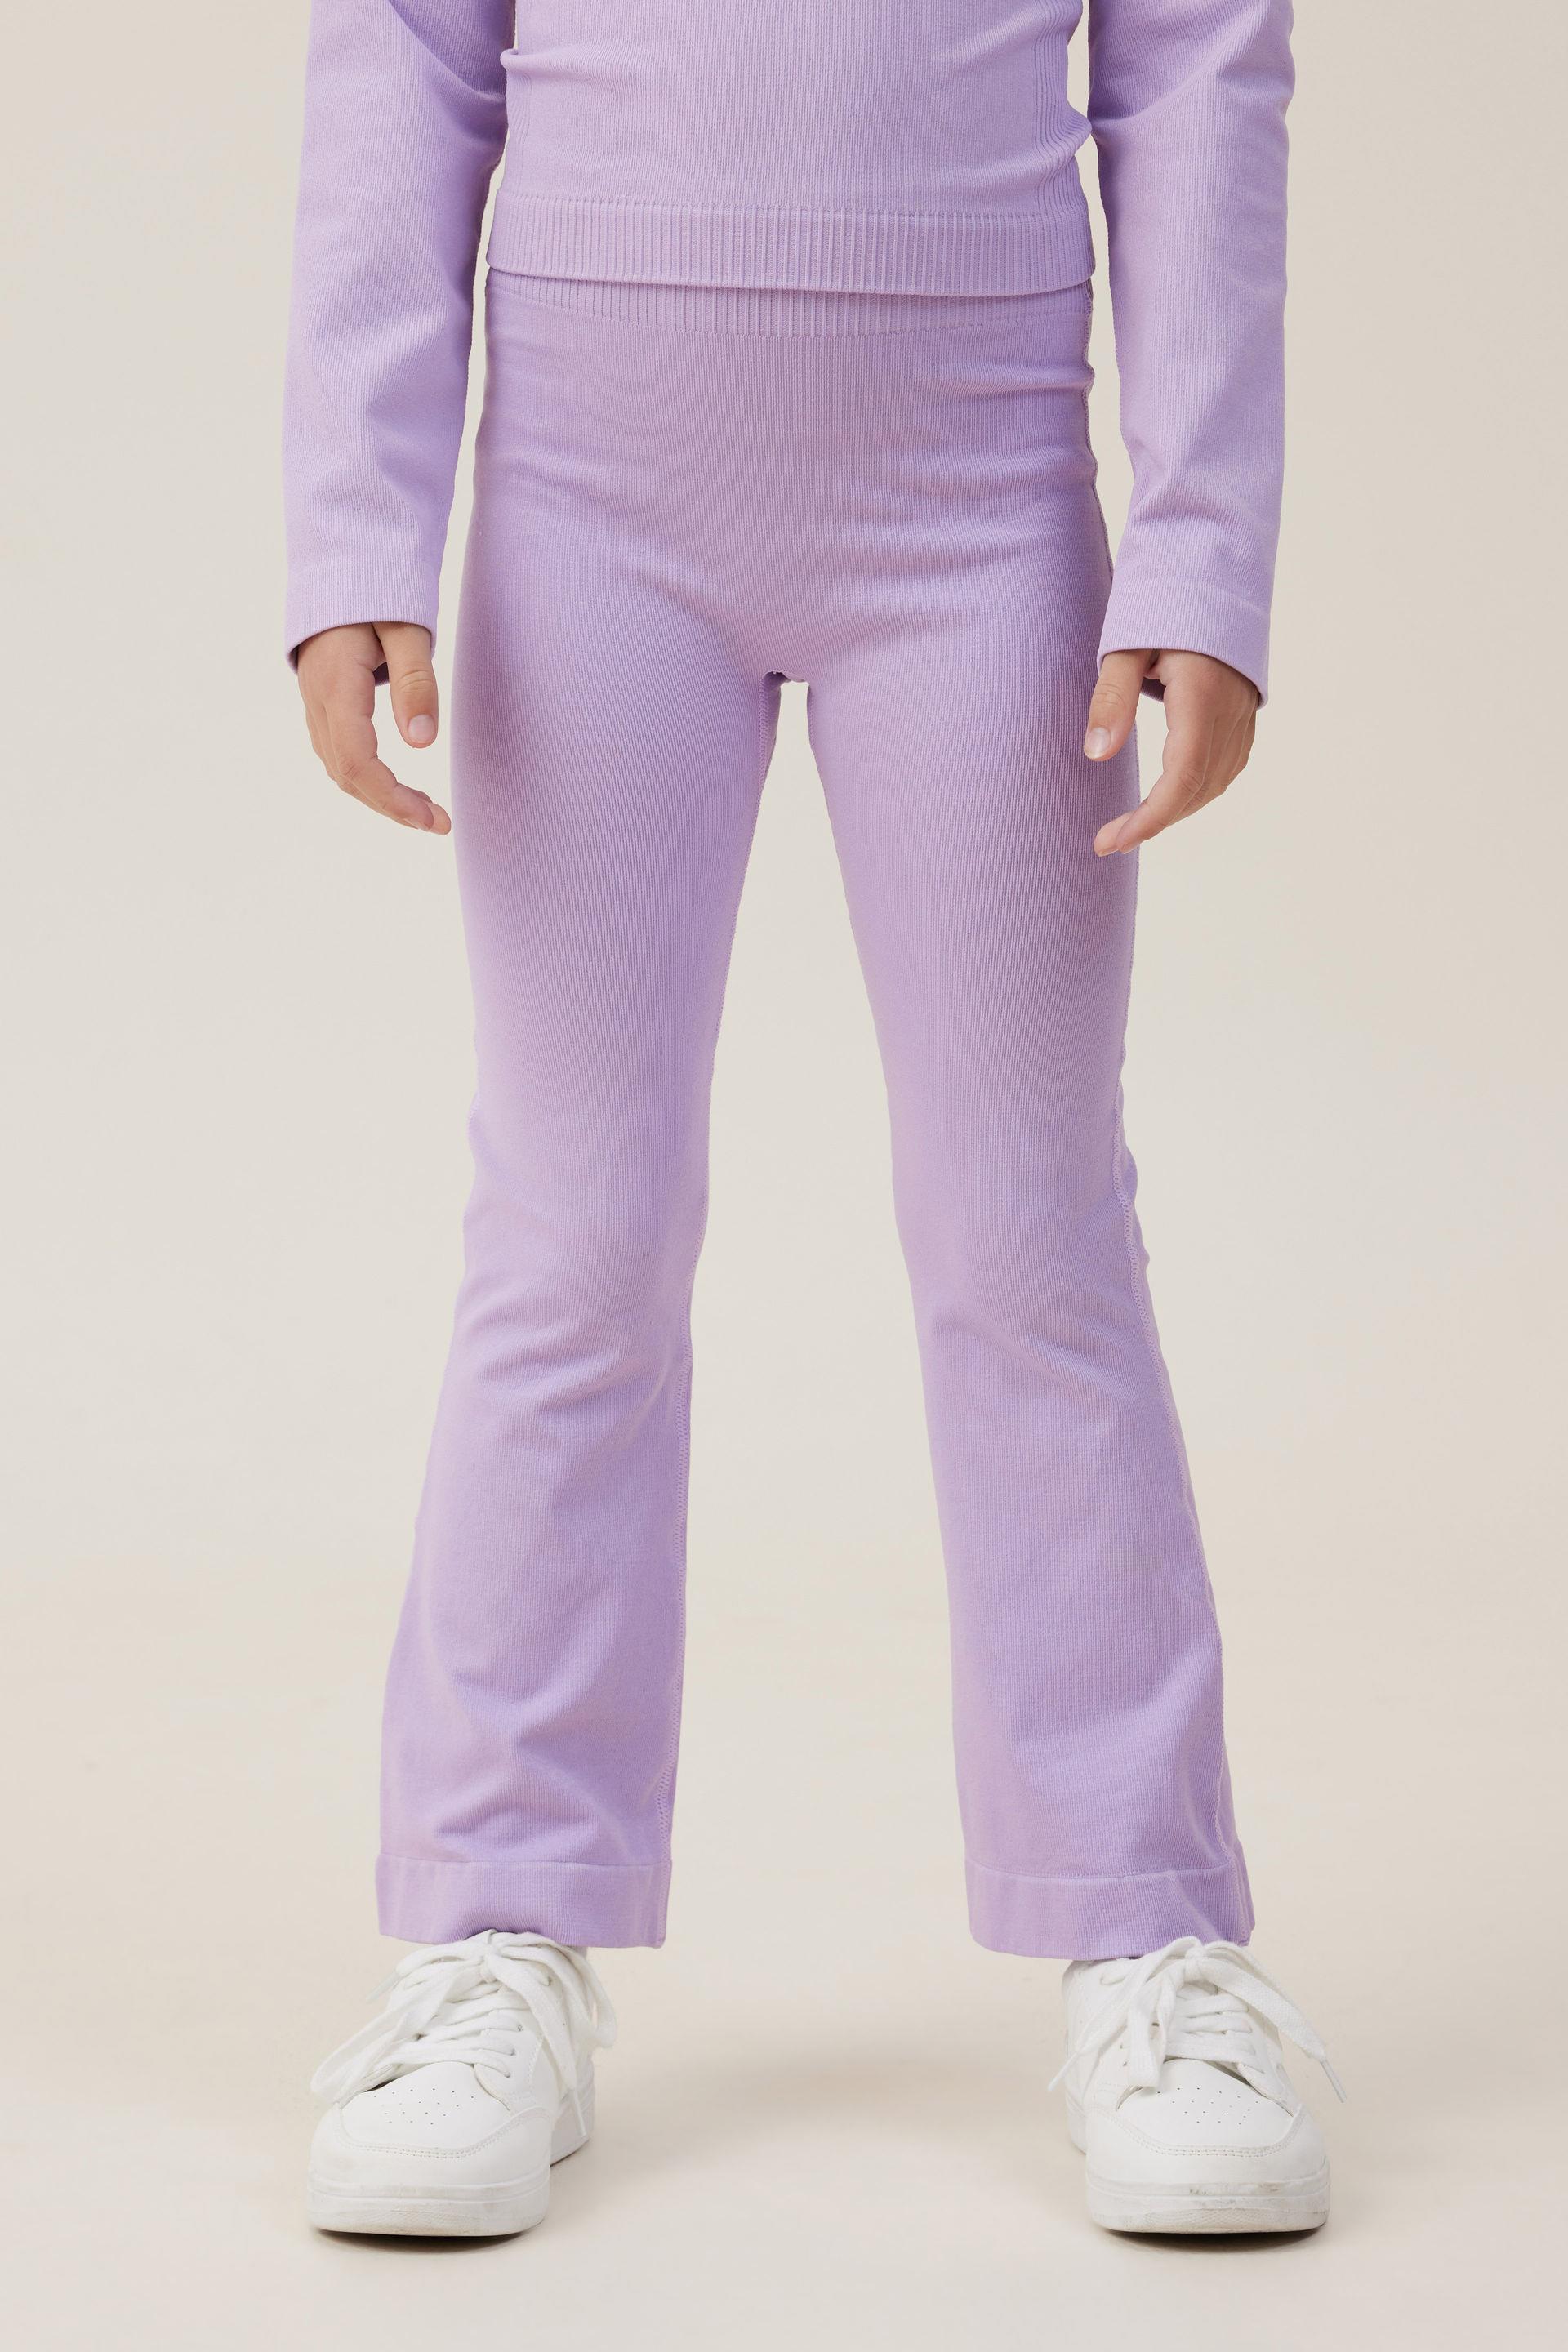 Cotton On Kids - Lucia Active Flare Pant - Lilac drop